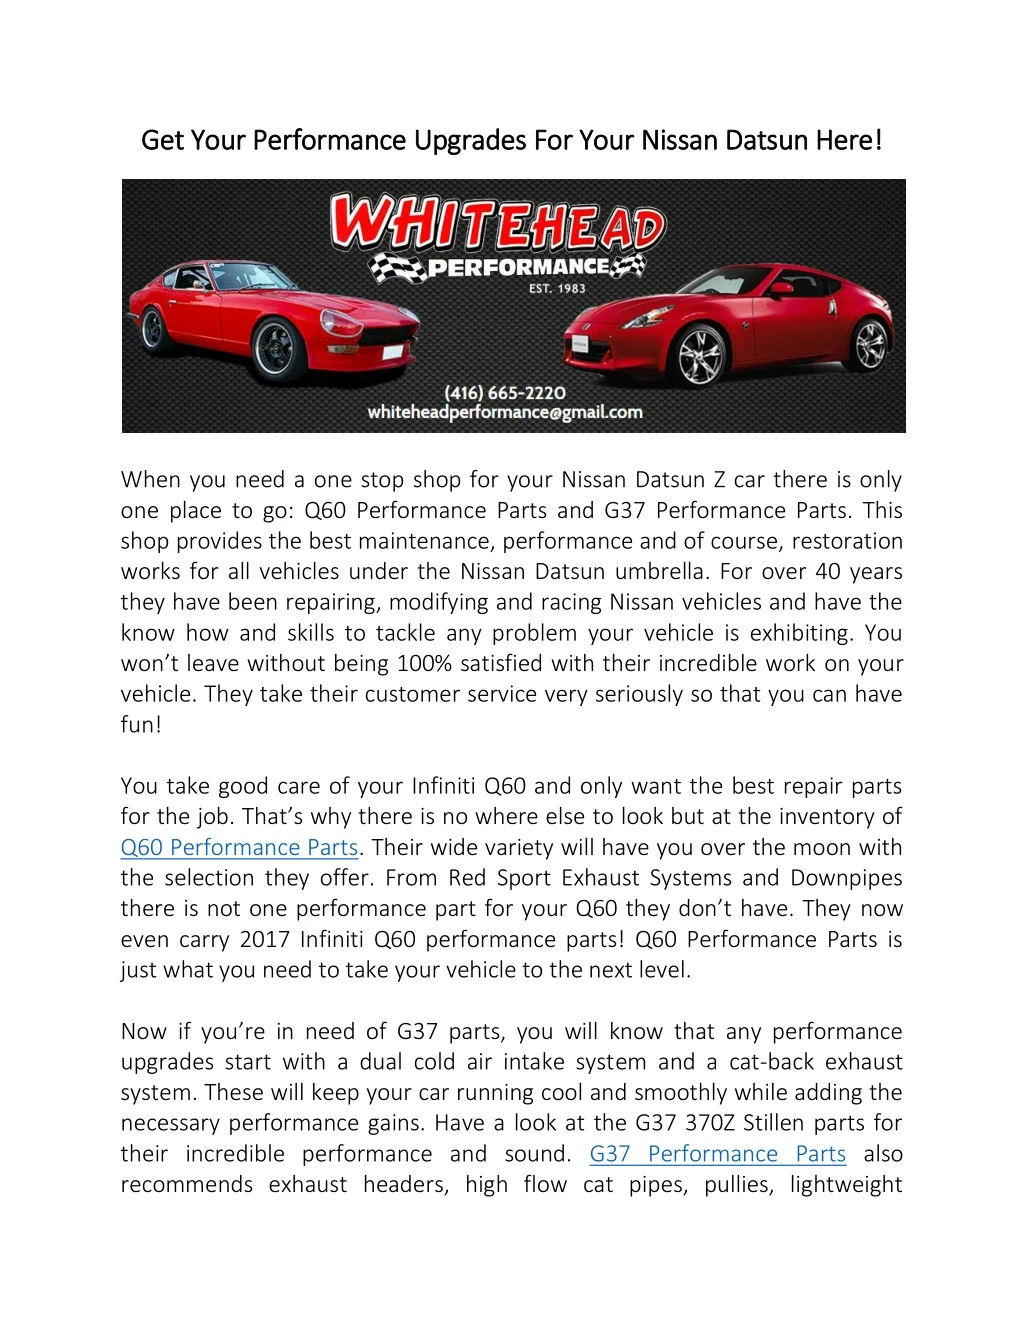 get your performance upgrades for your nissan